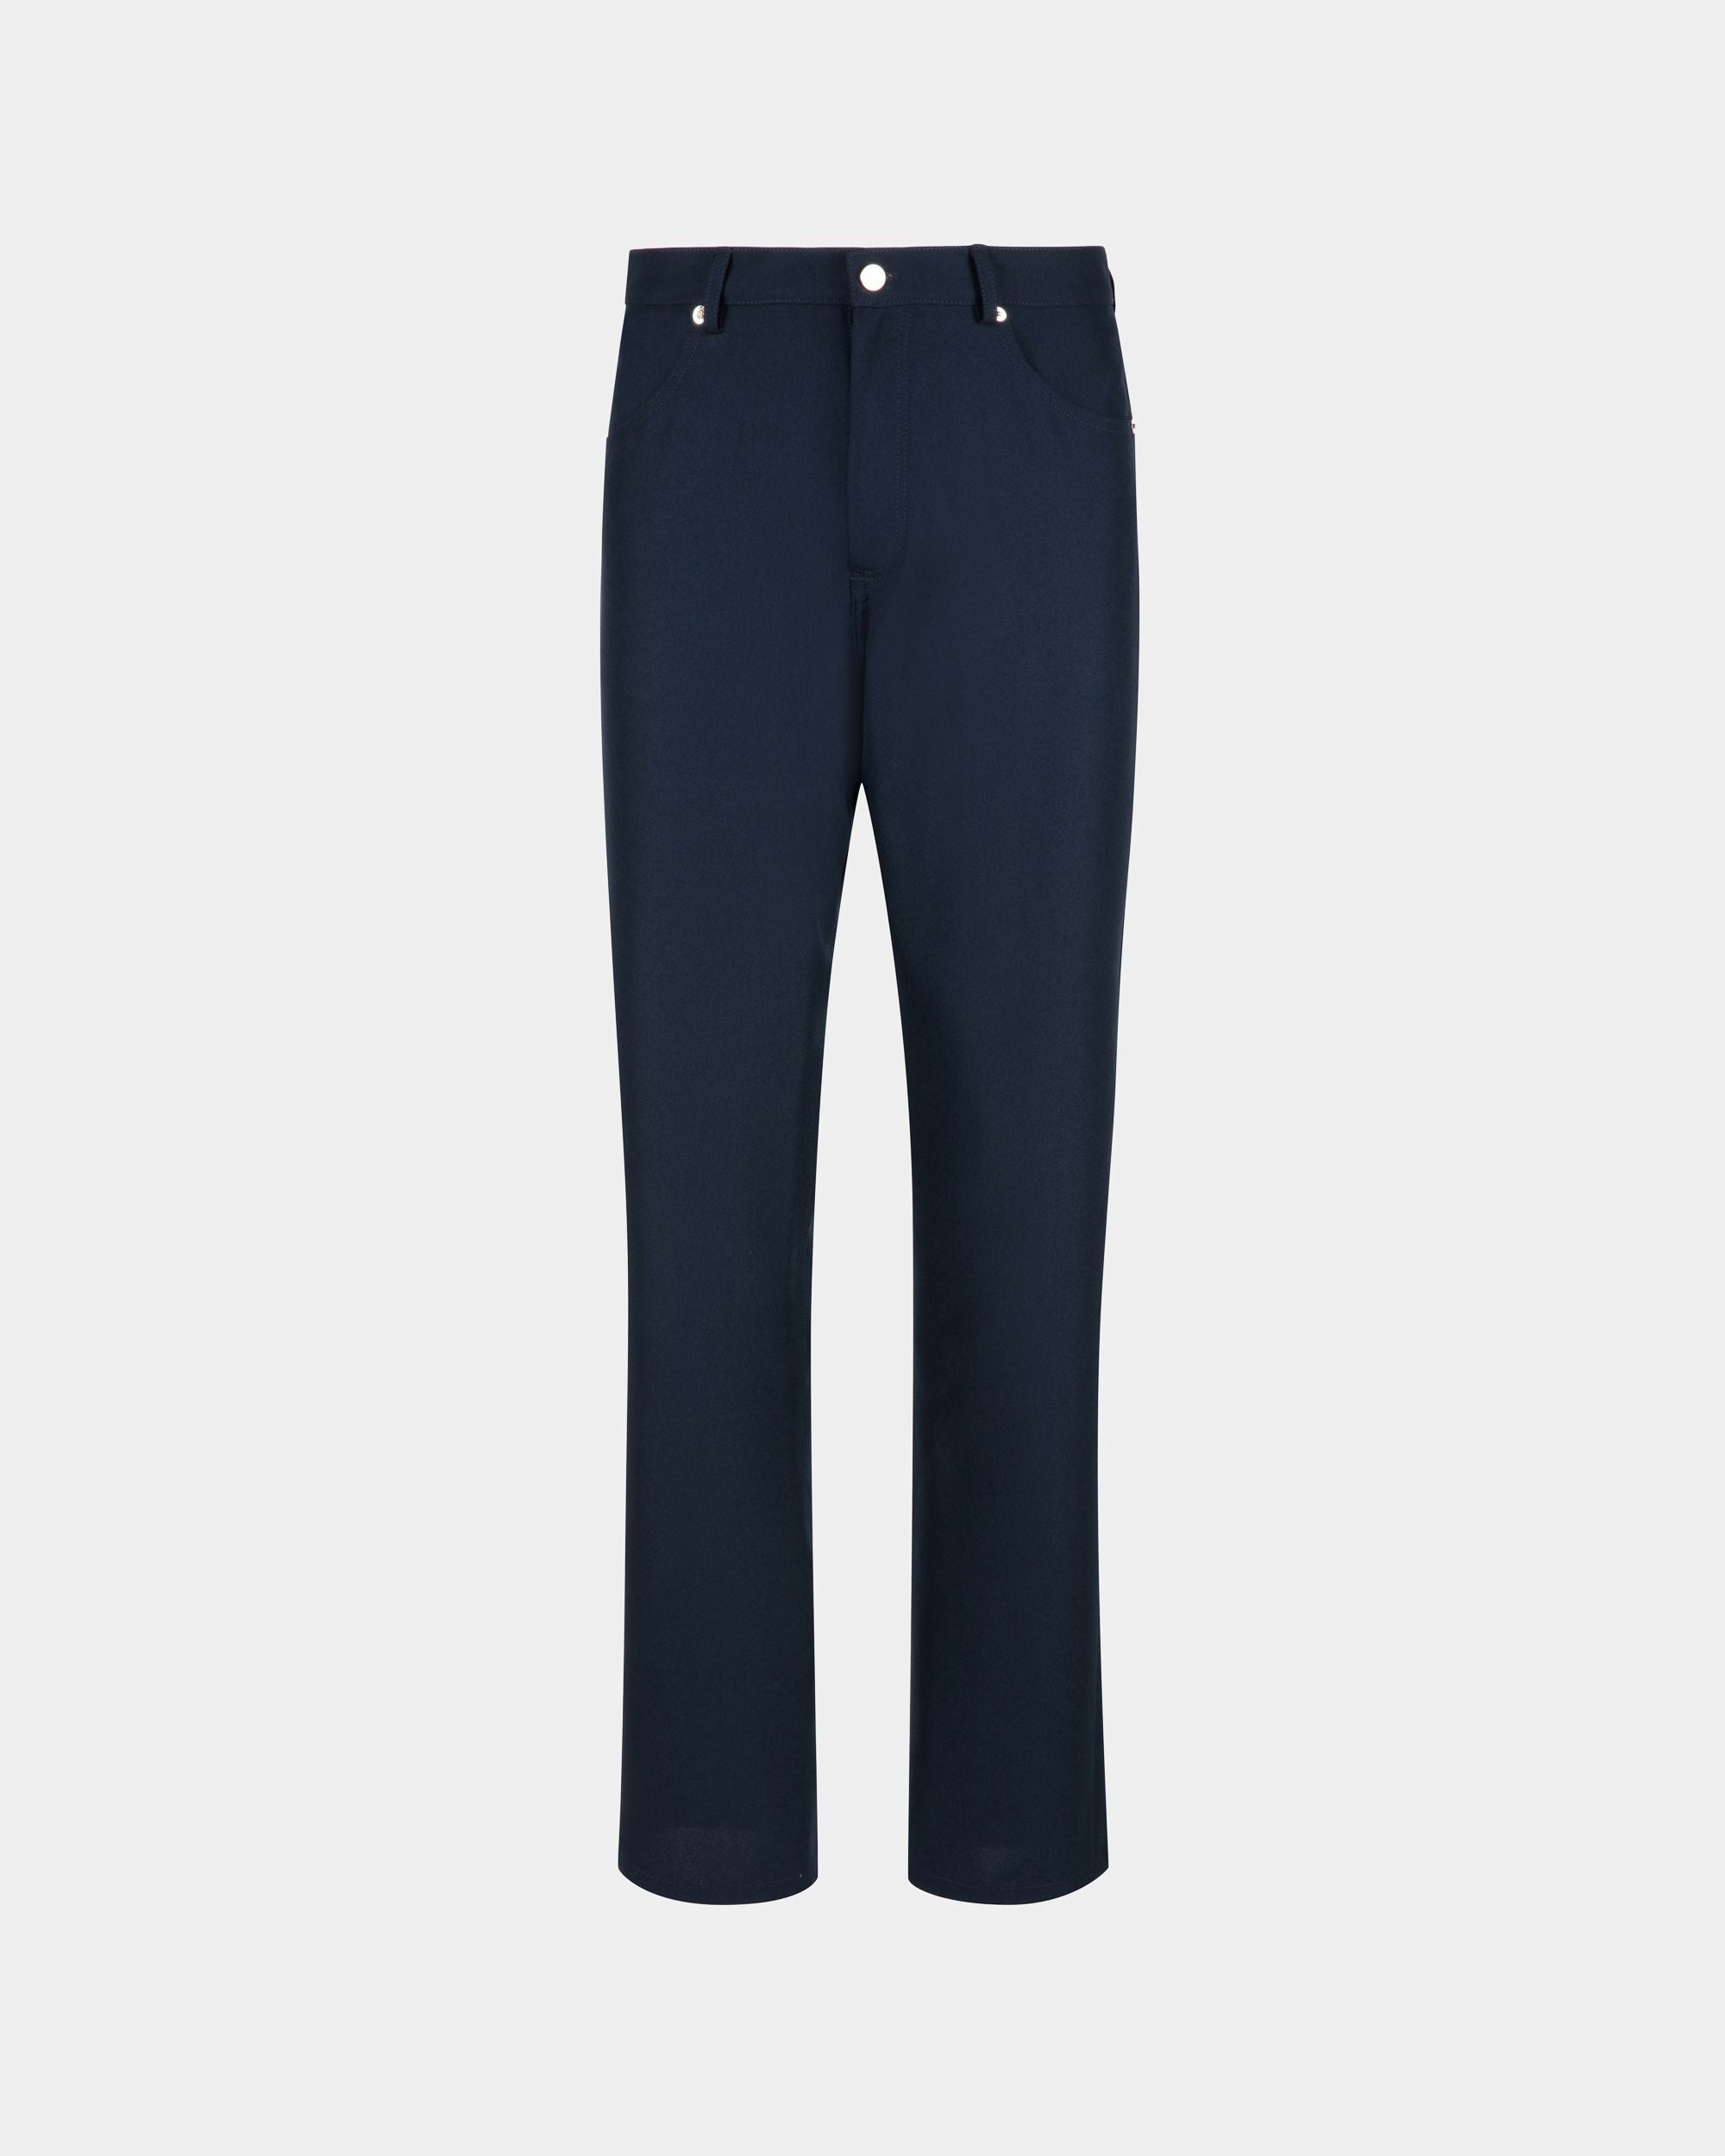 Men's Pants In Dark Blue Synthetic Fabric | Bally | Still Life Front